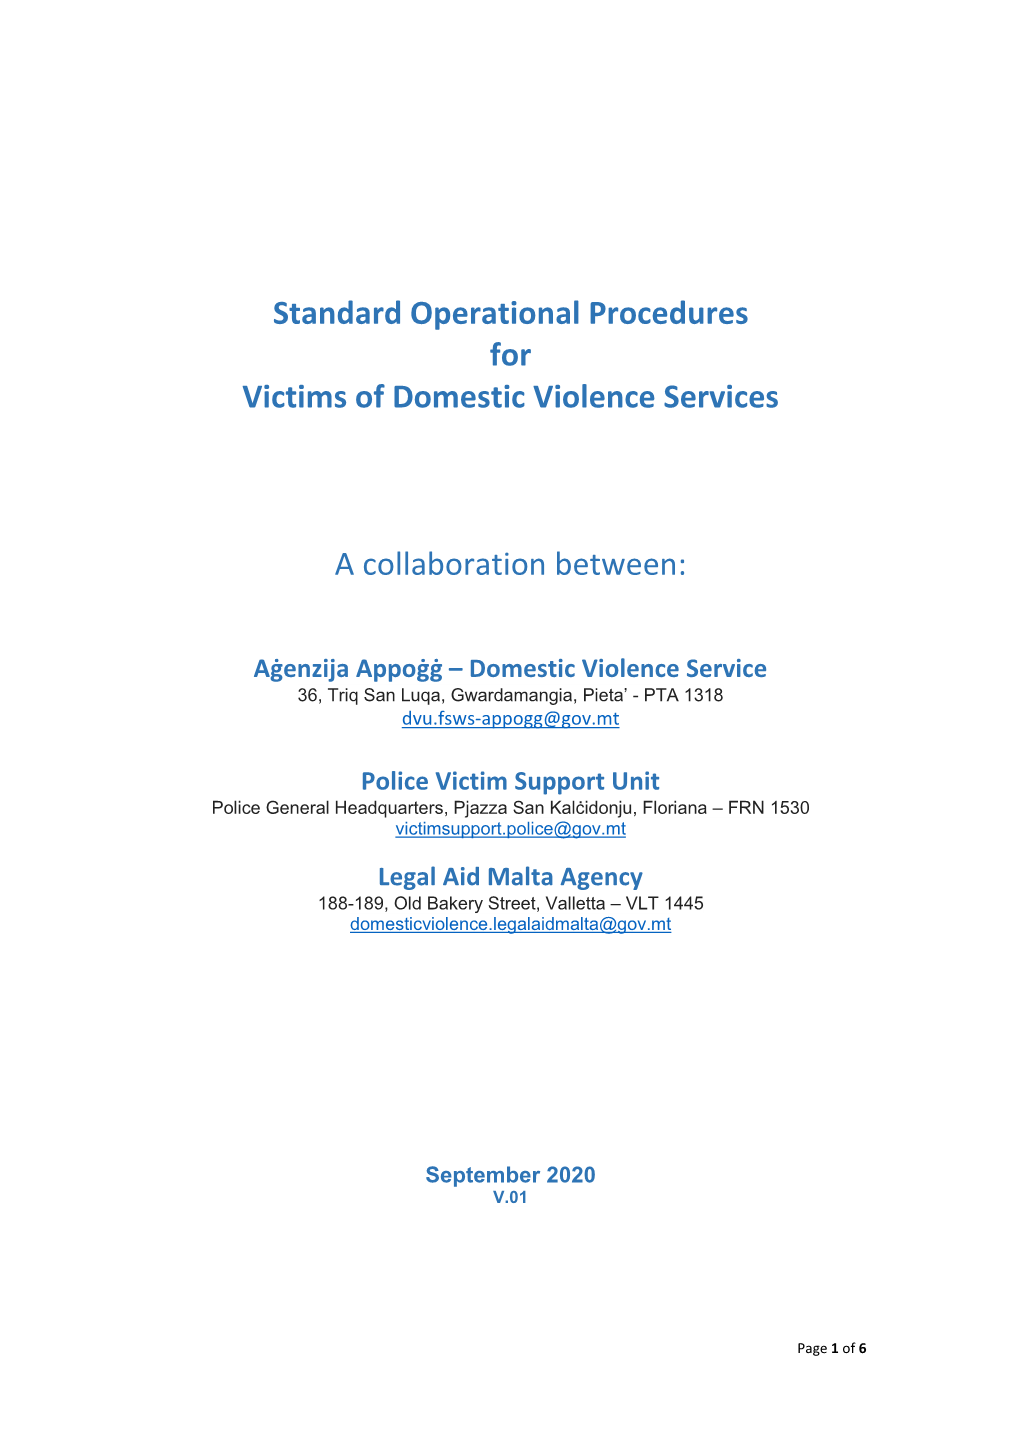 Standard Operational Procedures for Victims of Domestic Violence Services